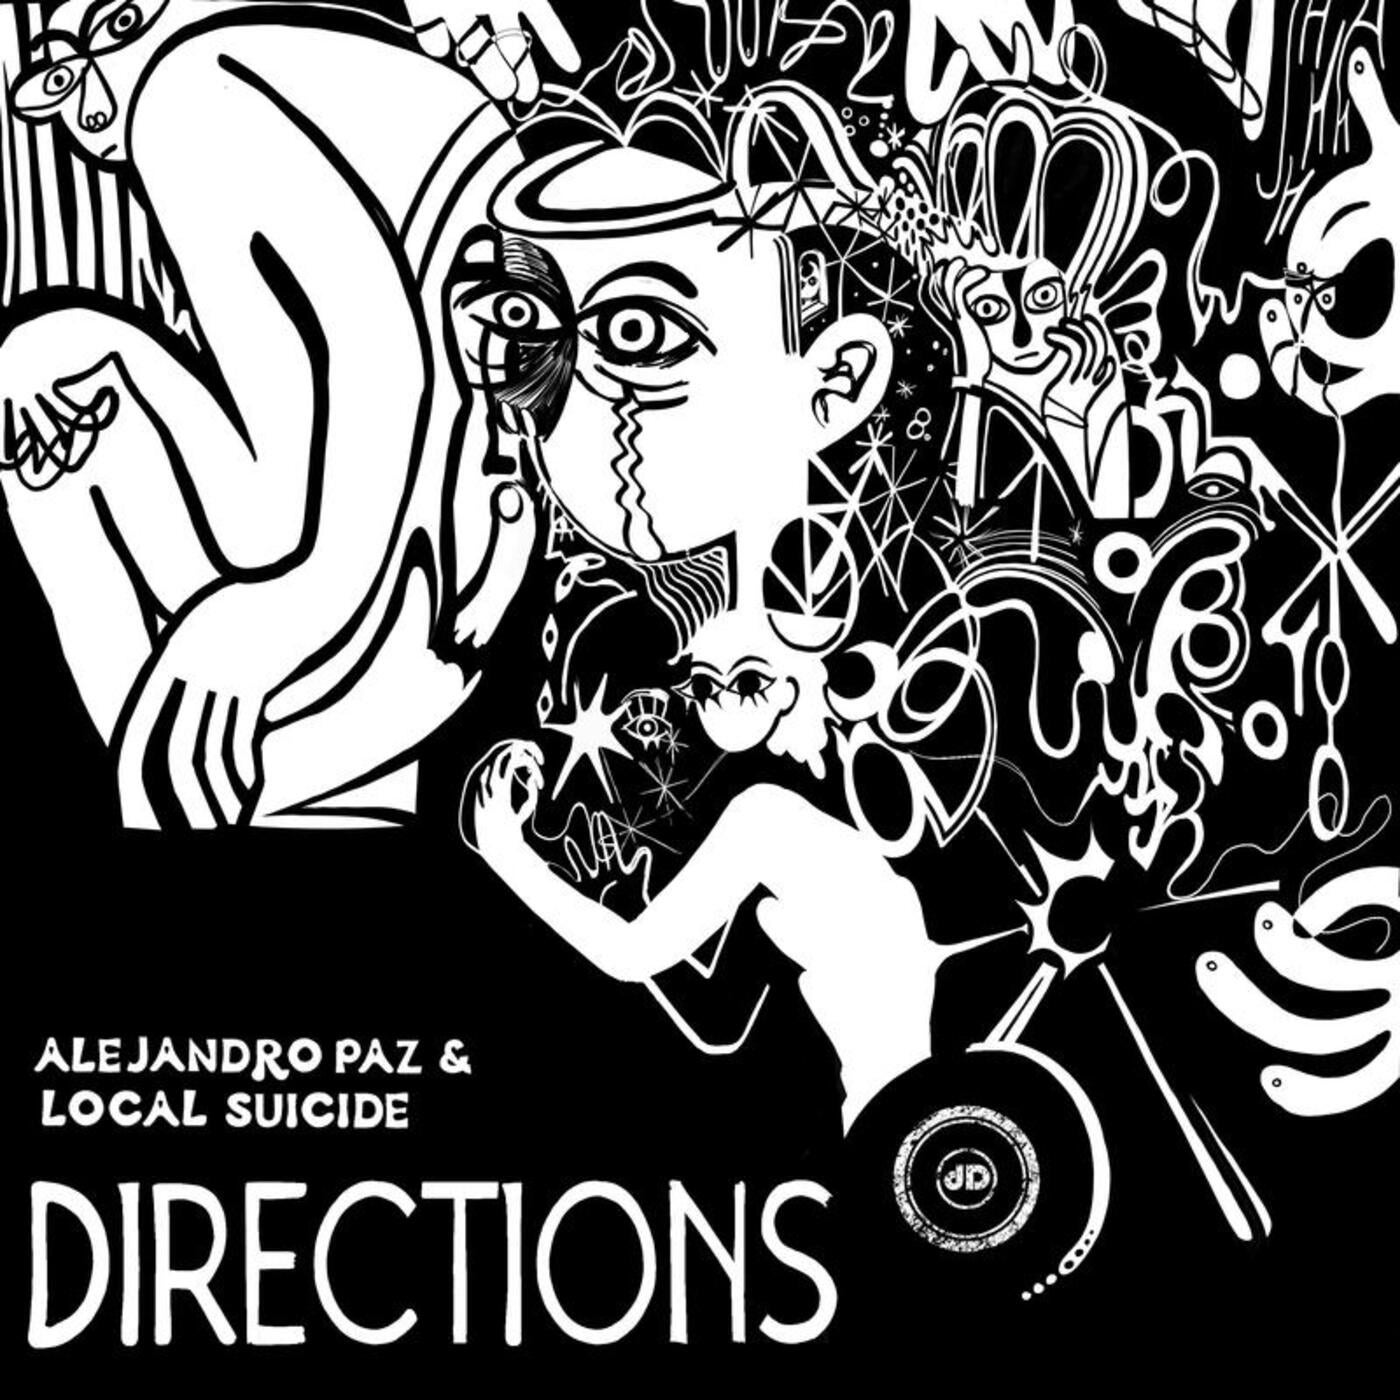 Download Directions on Electrobuzz